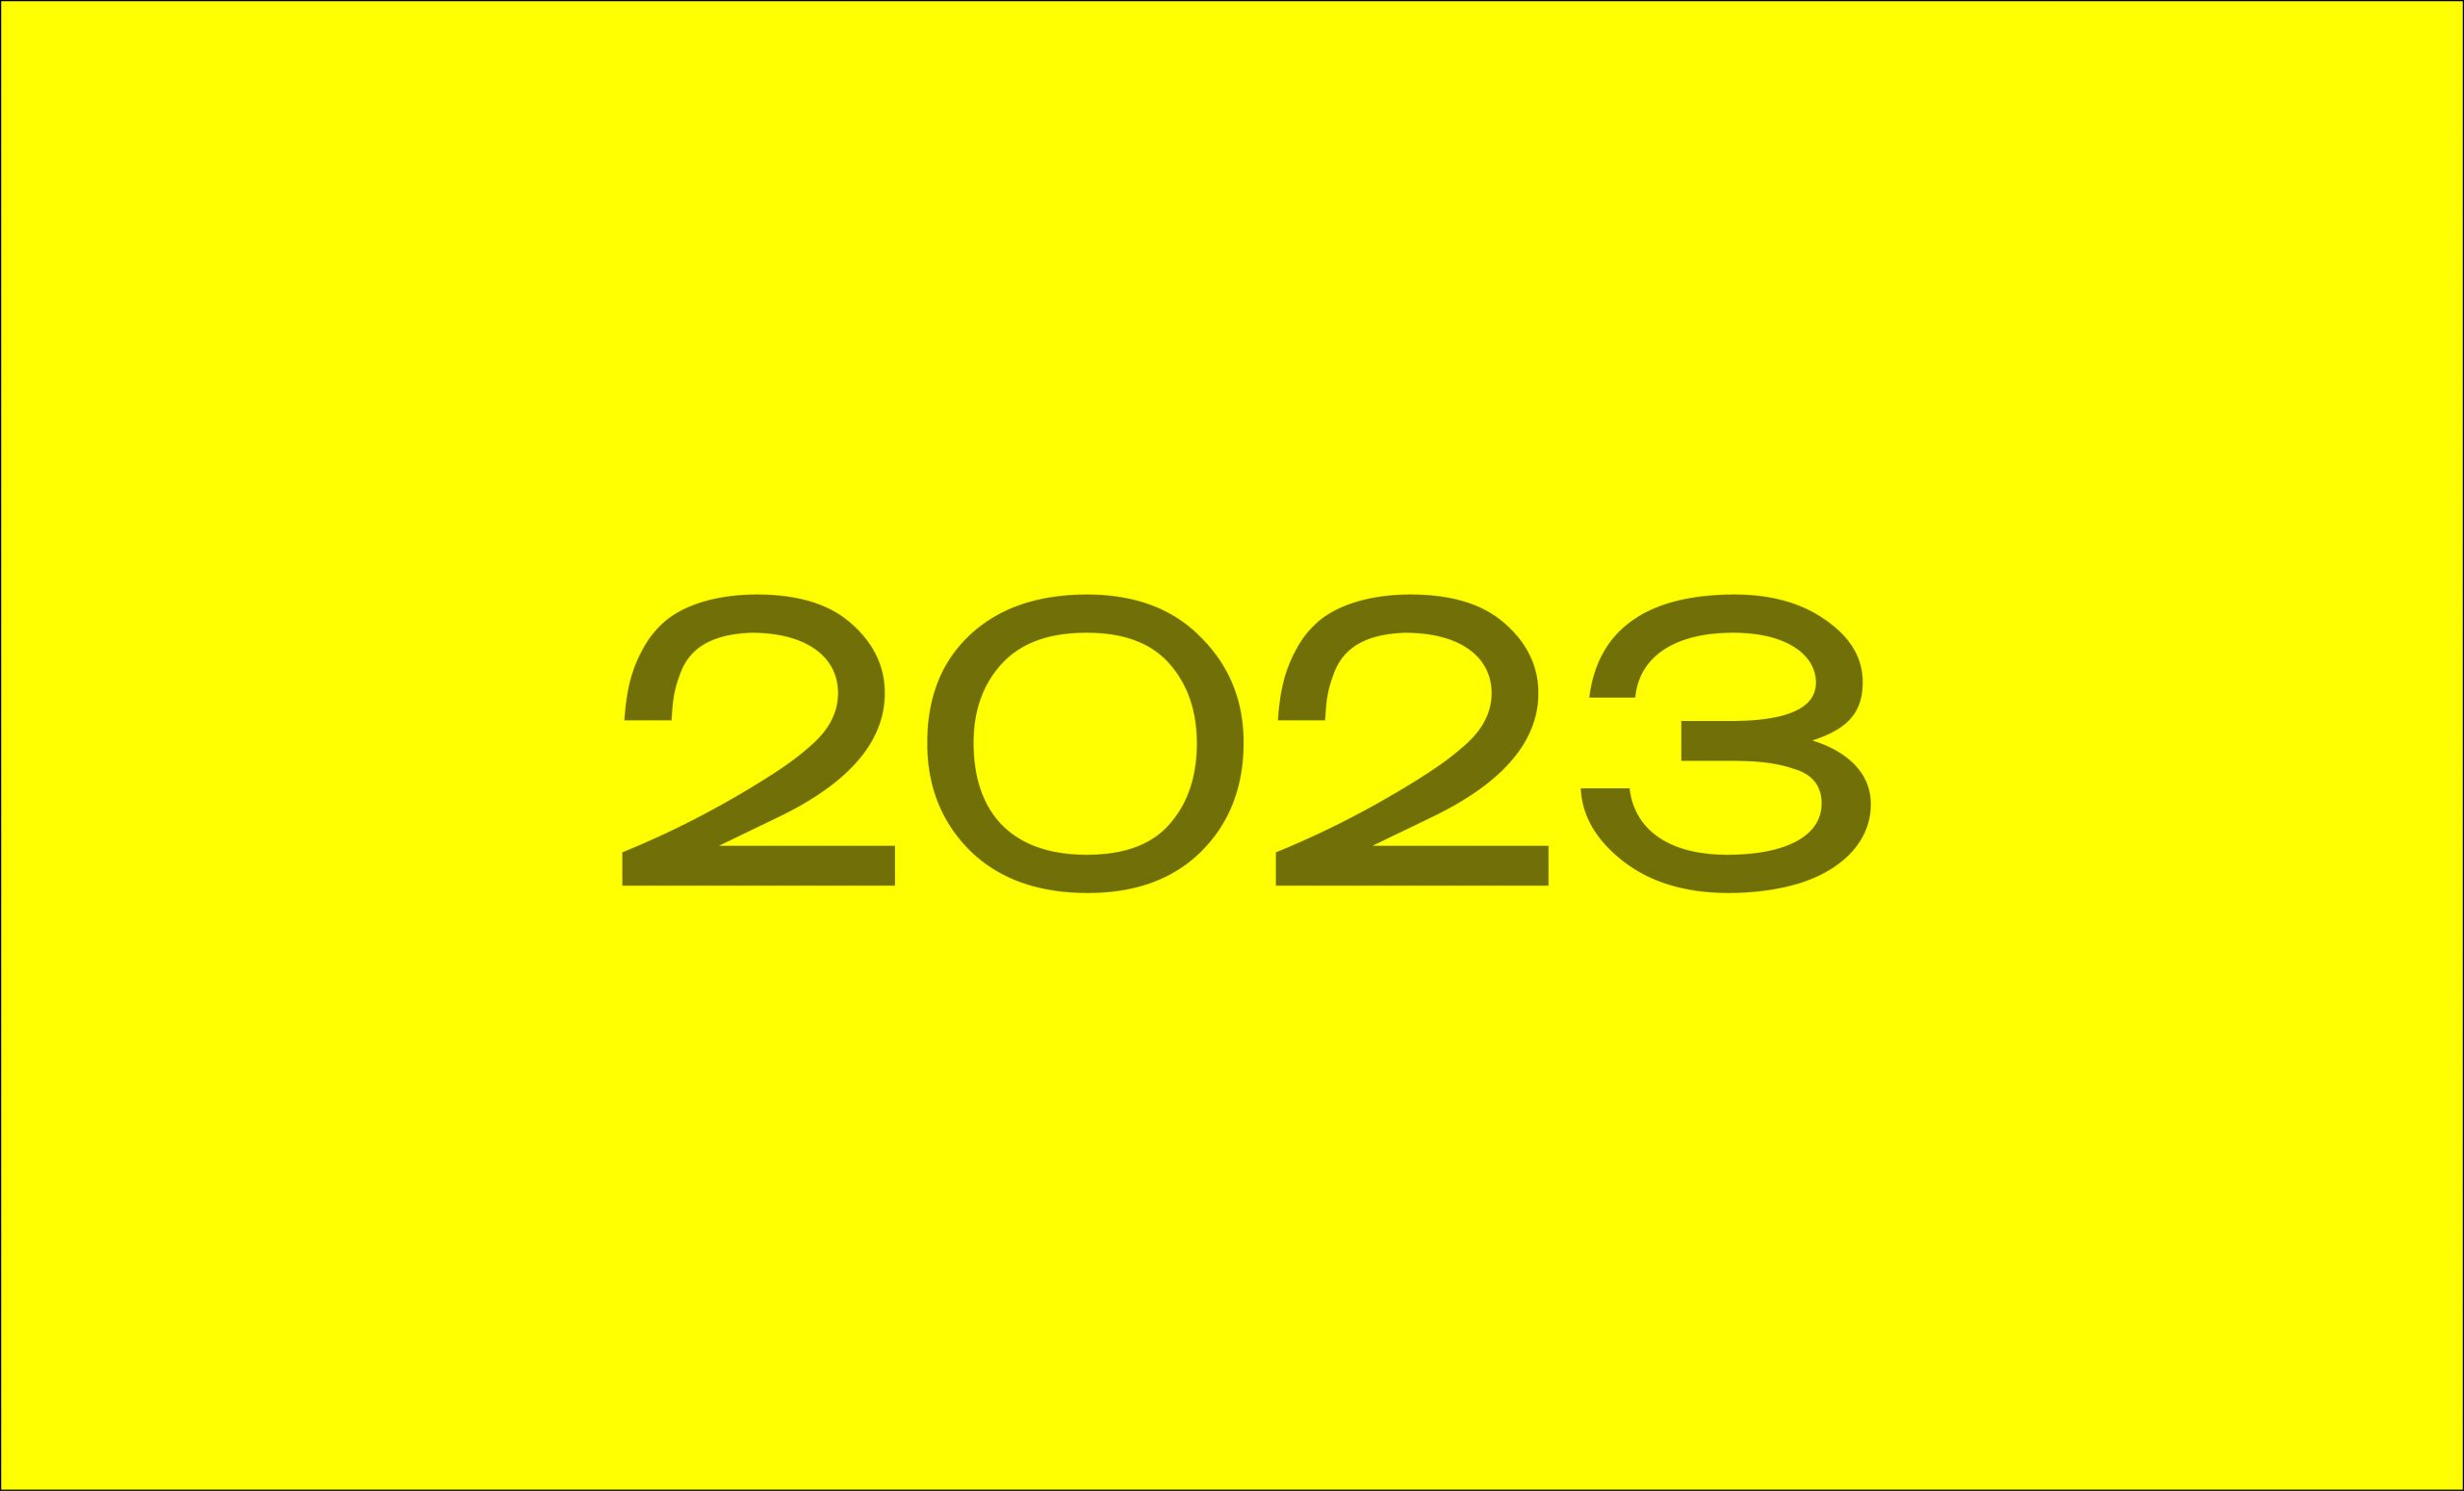 2023 done properly